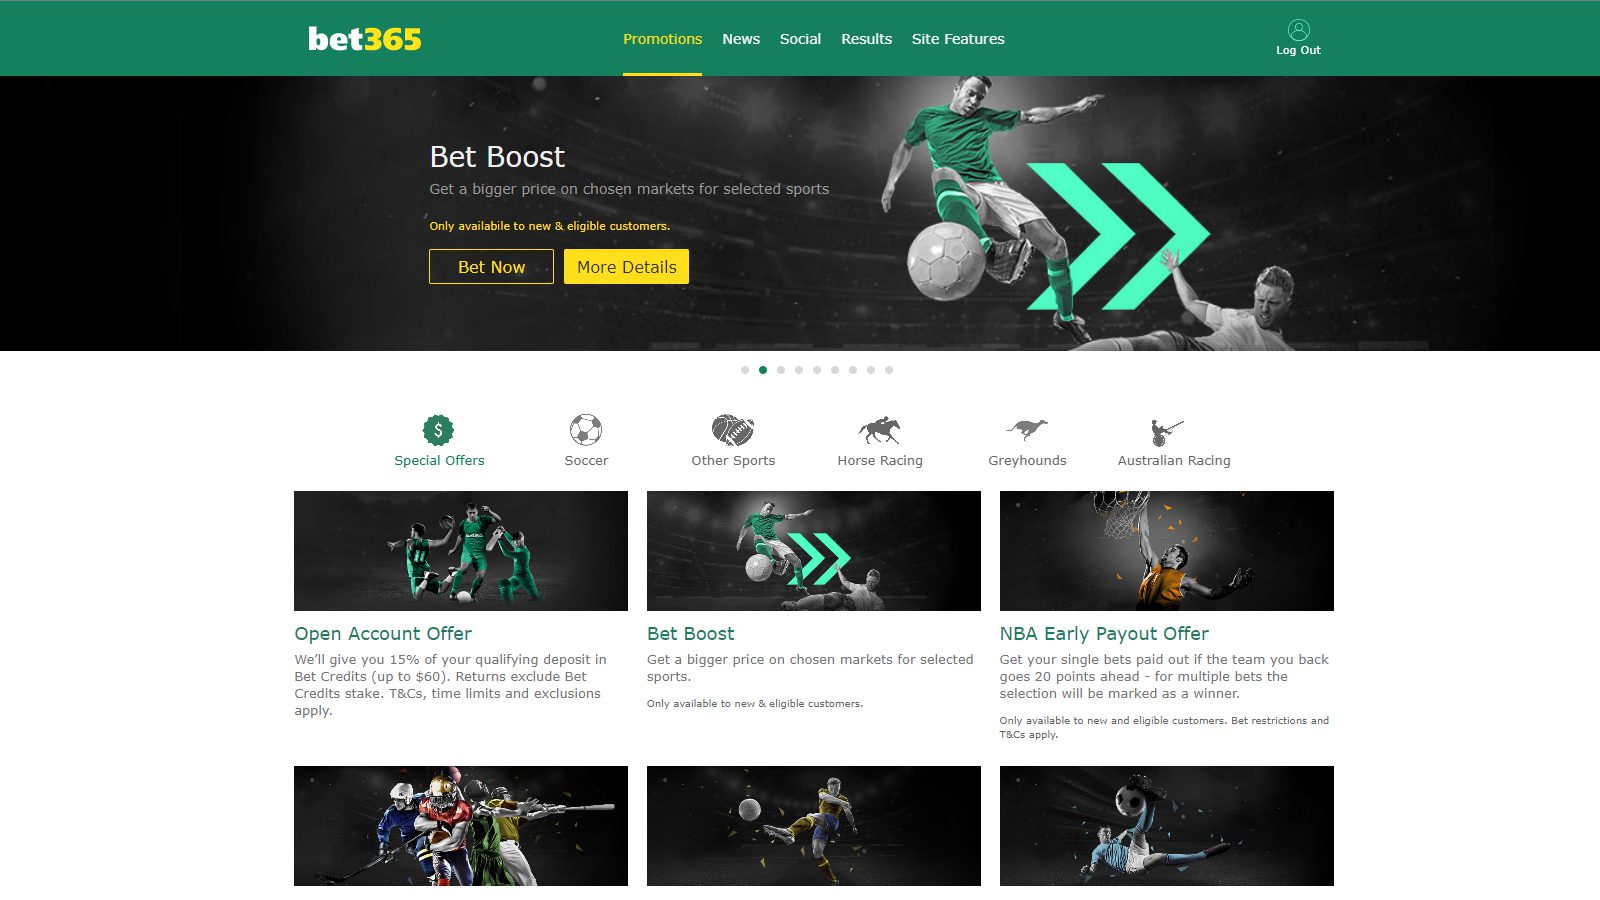 Bet365 - Promotions Page